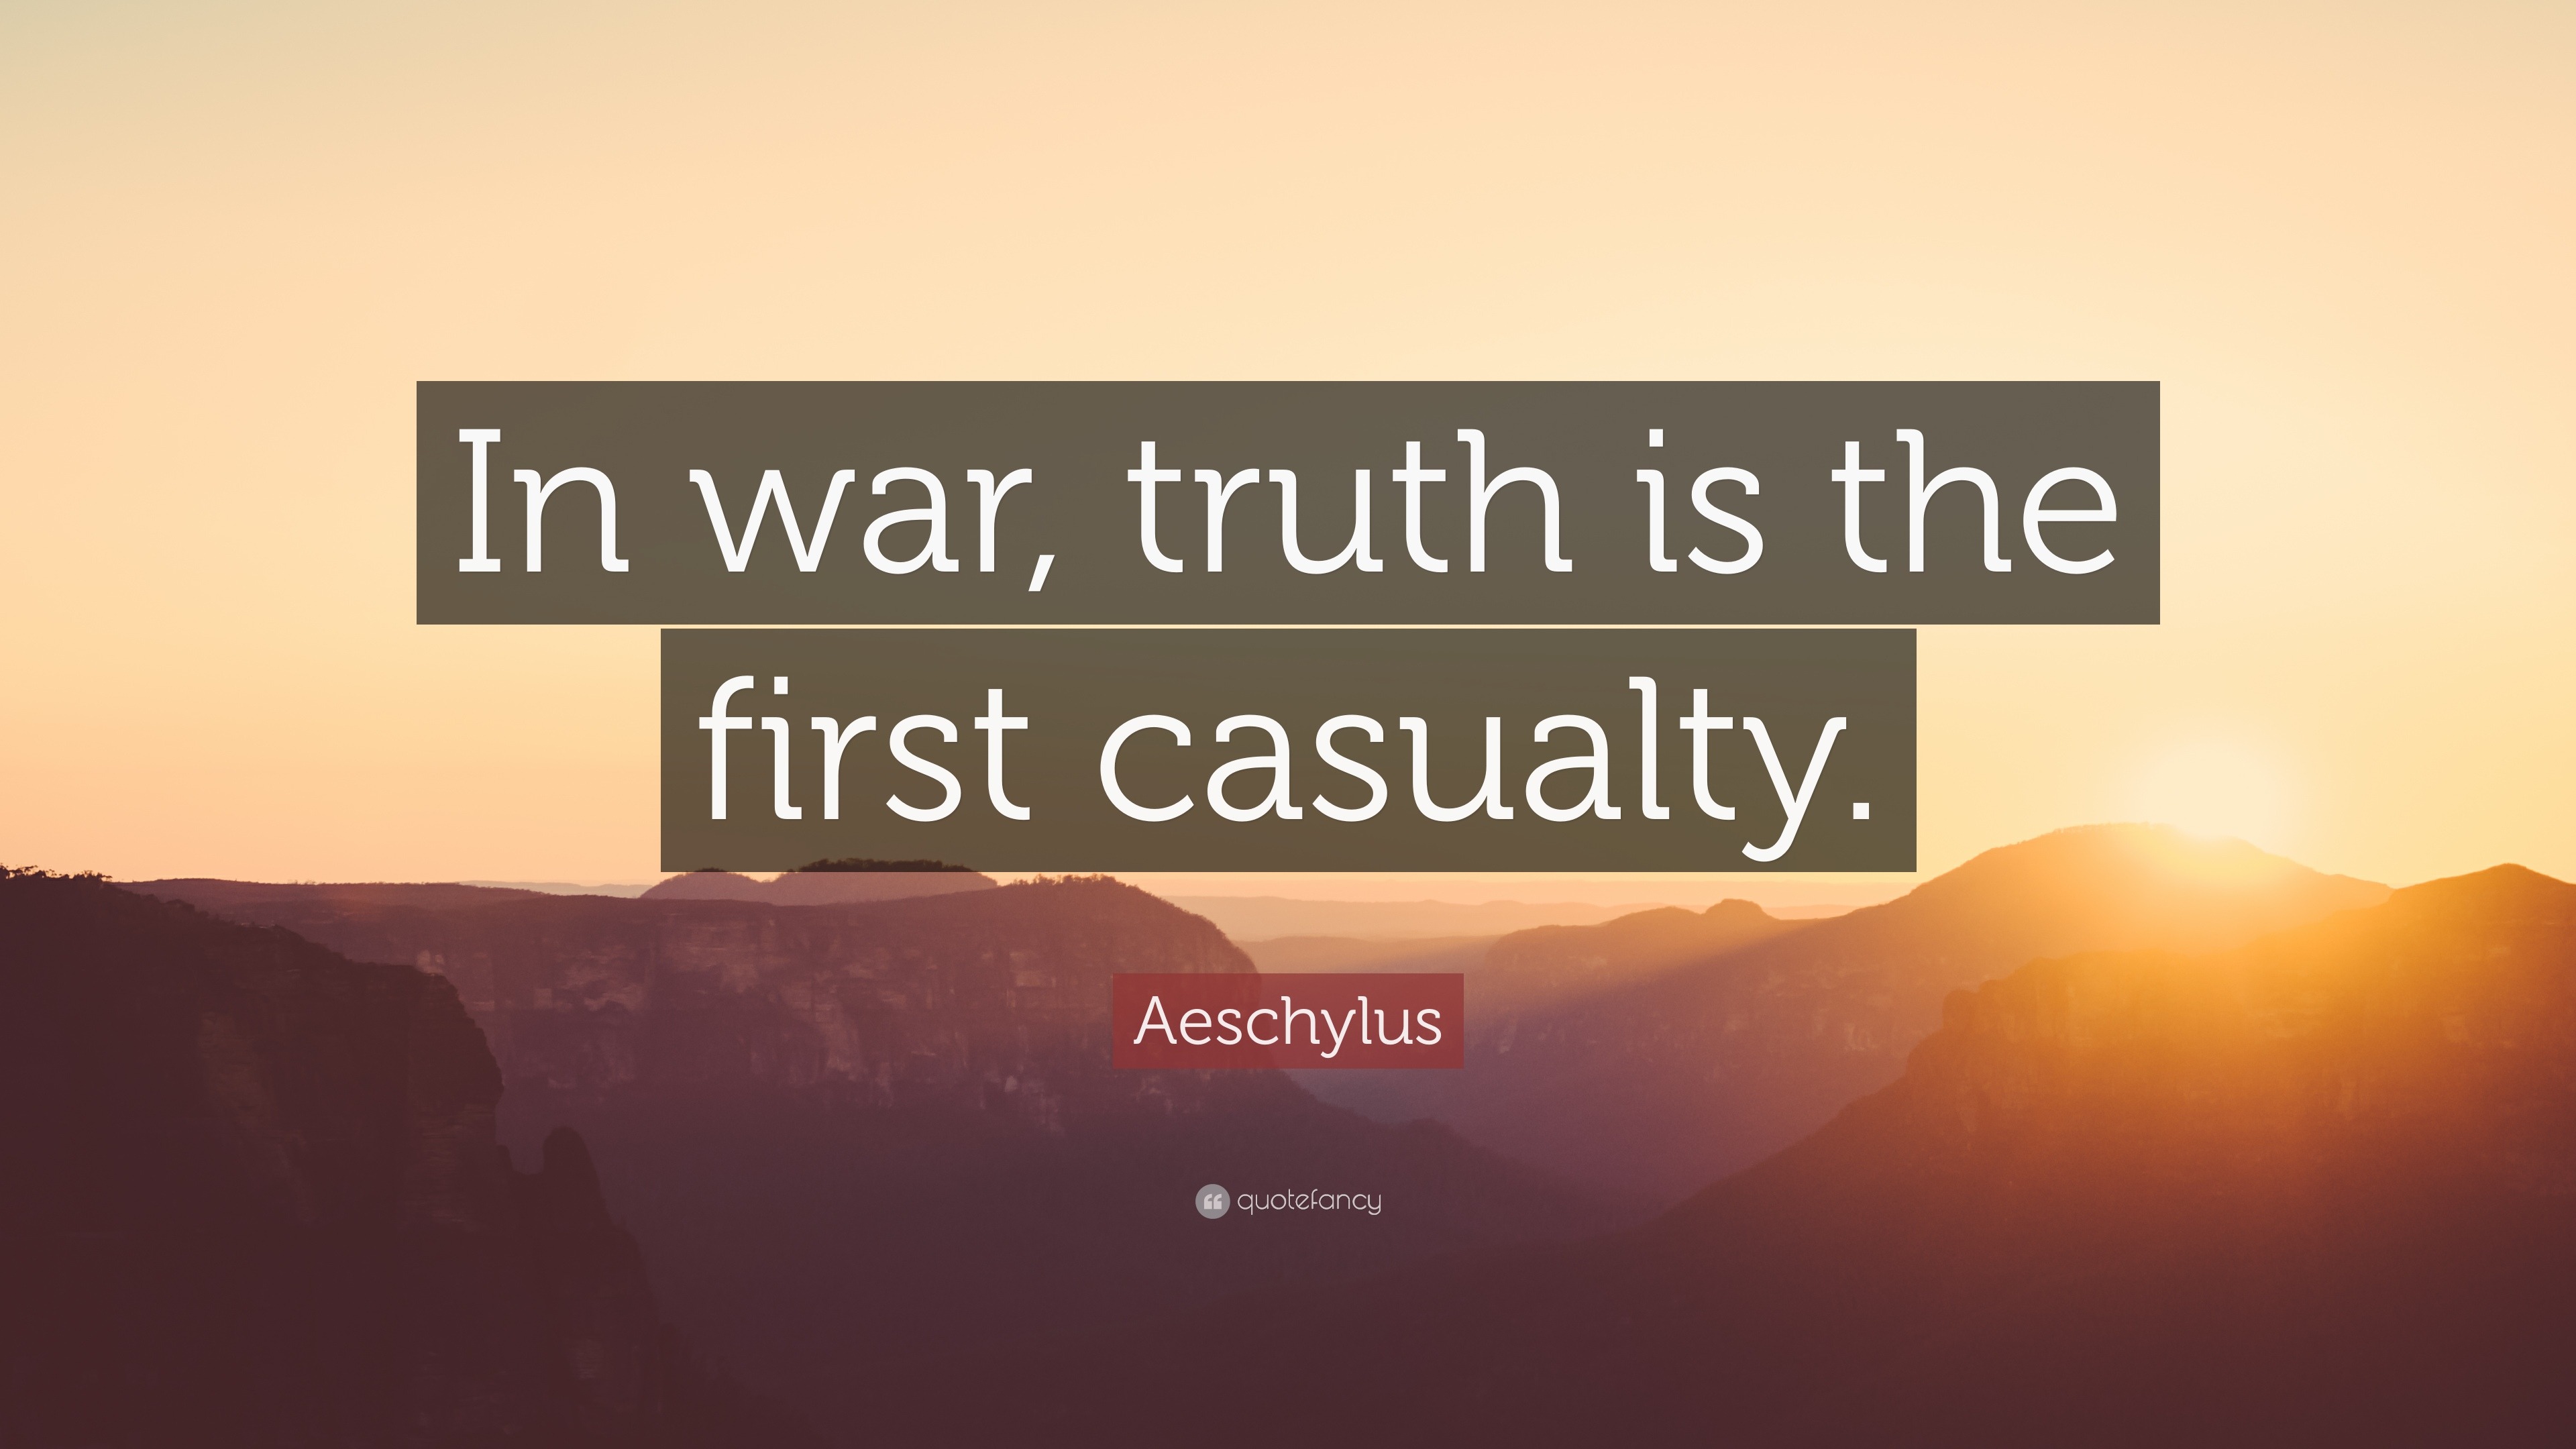 570862-Aeschylus-Quote-In-war-truth-is-the-first-casualty.jpg